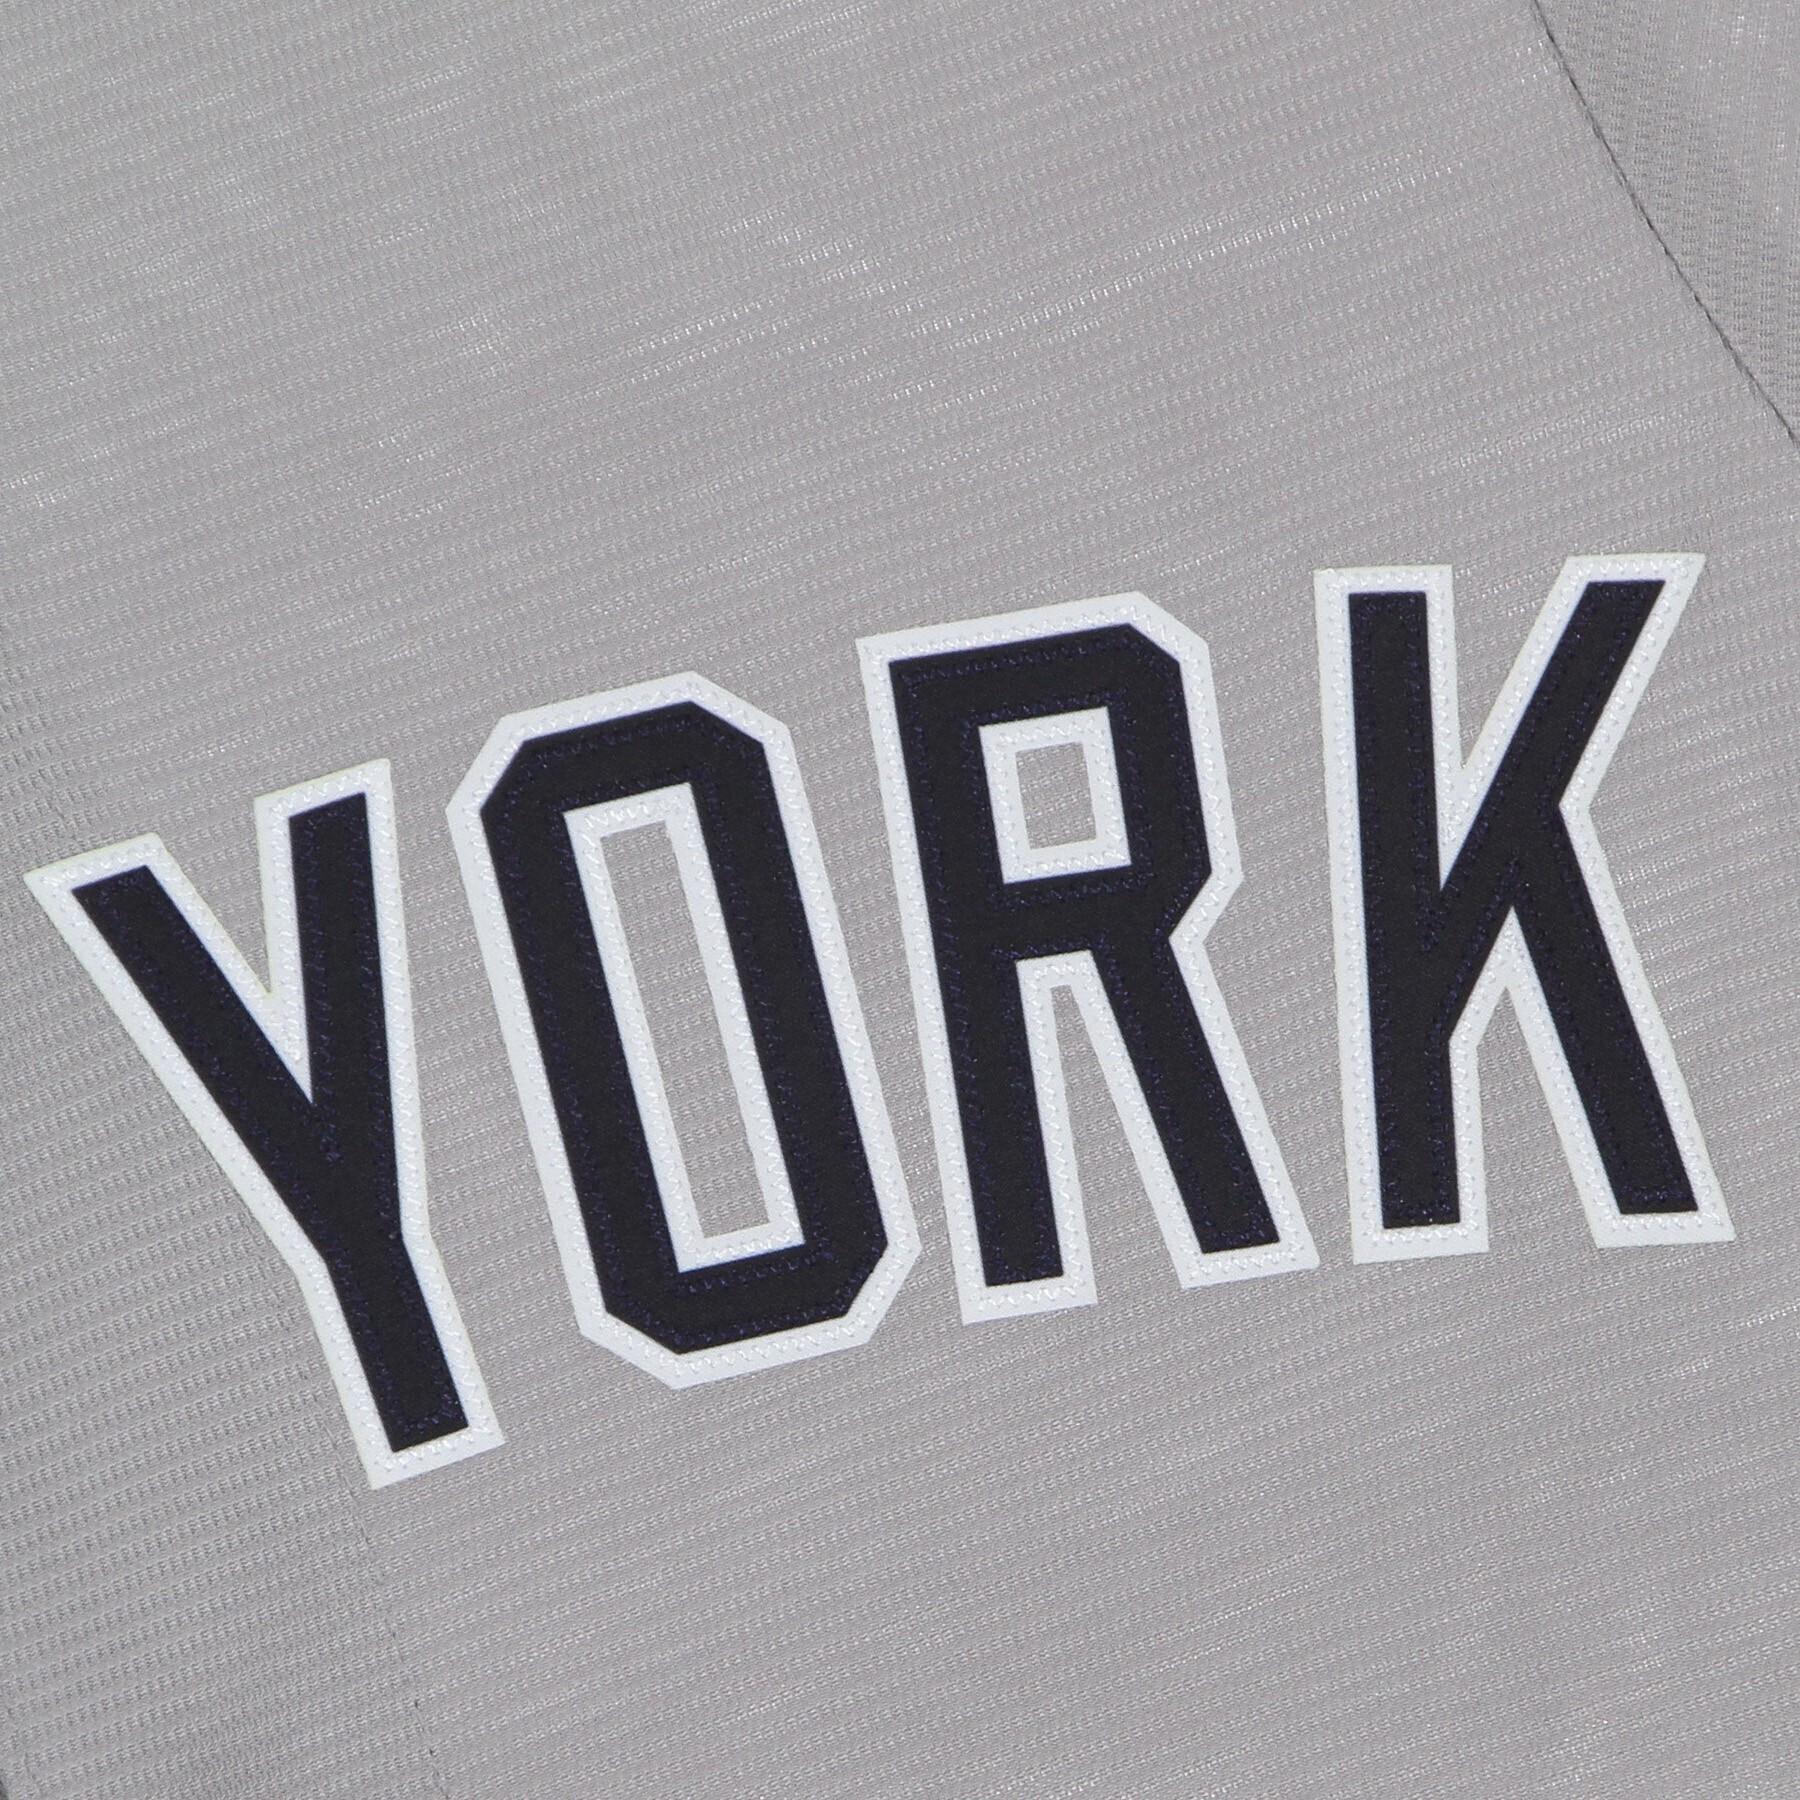 Official jersey New York Yankees Road